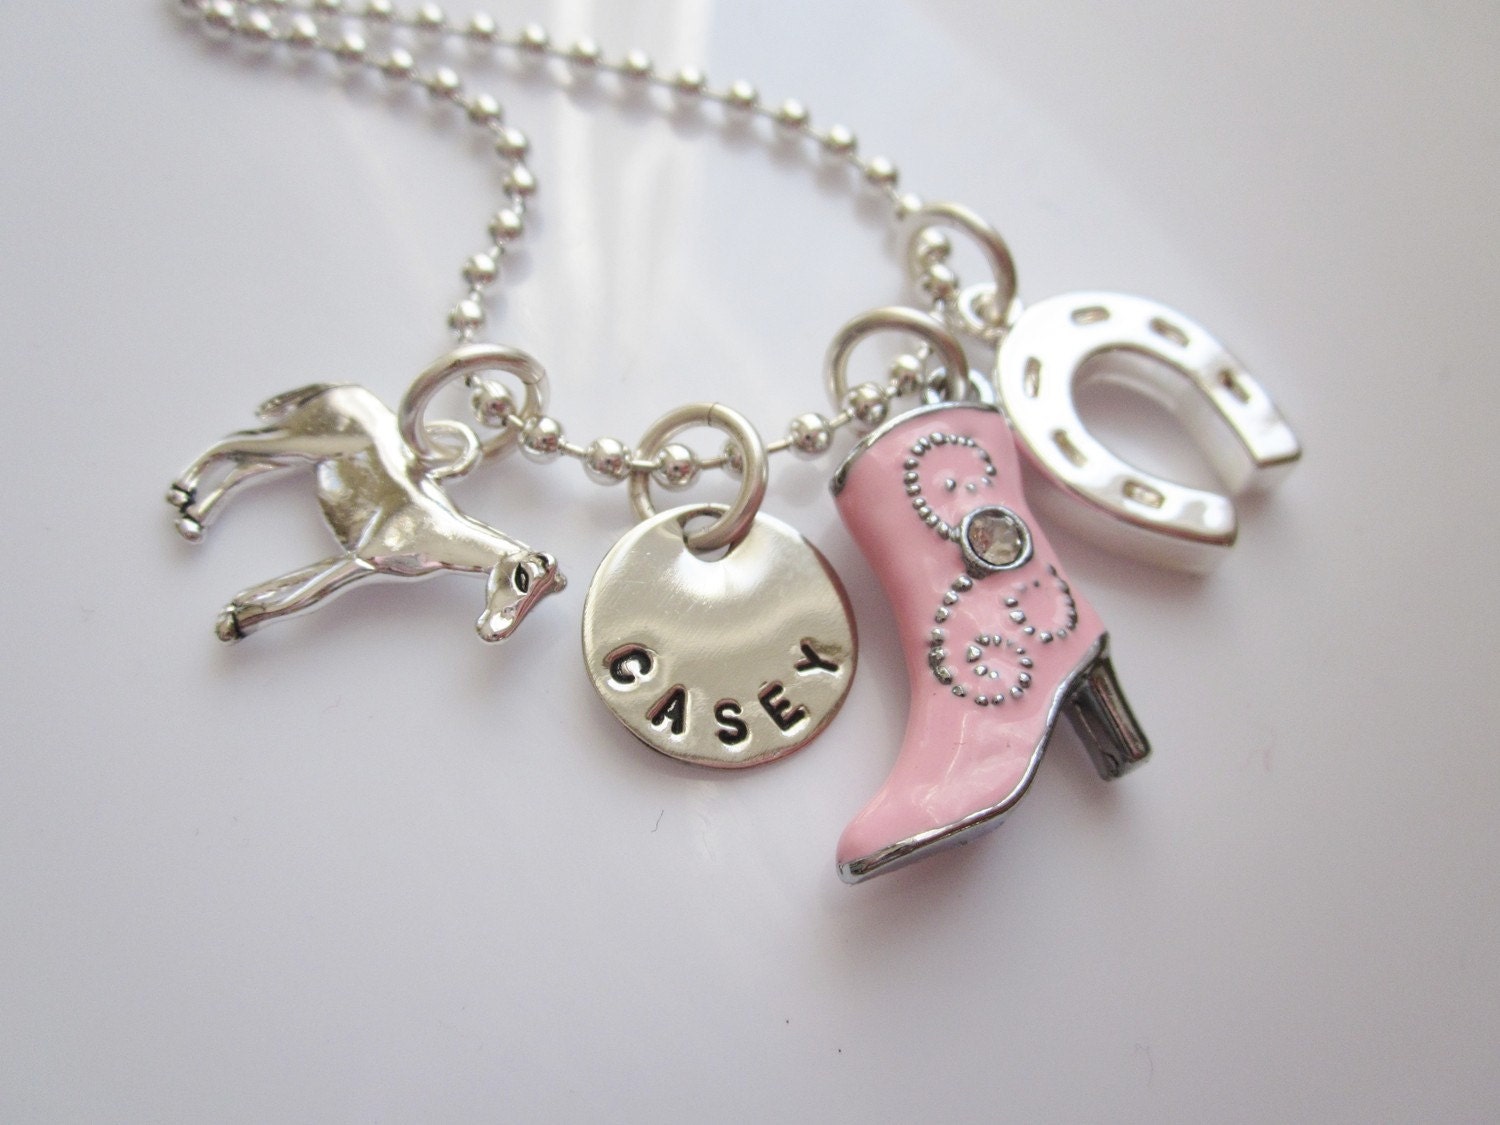 Girls Bracelets on Cowgirl Necklace   Personalized Girls Jewelry   Girls Necklaces